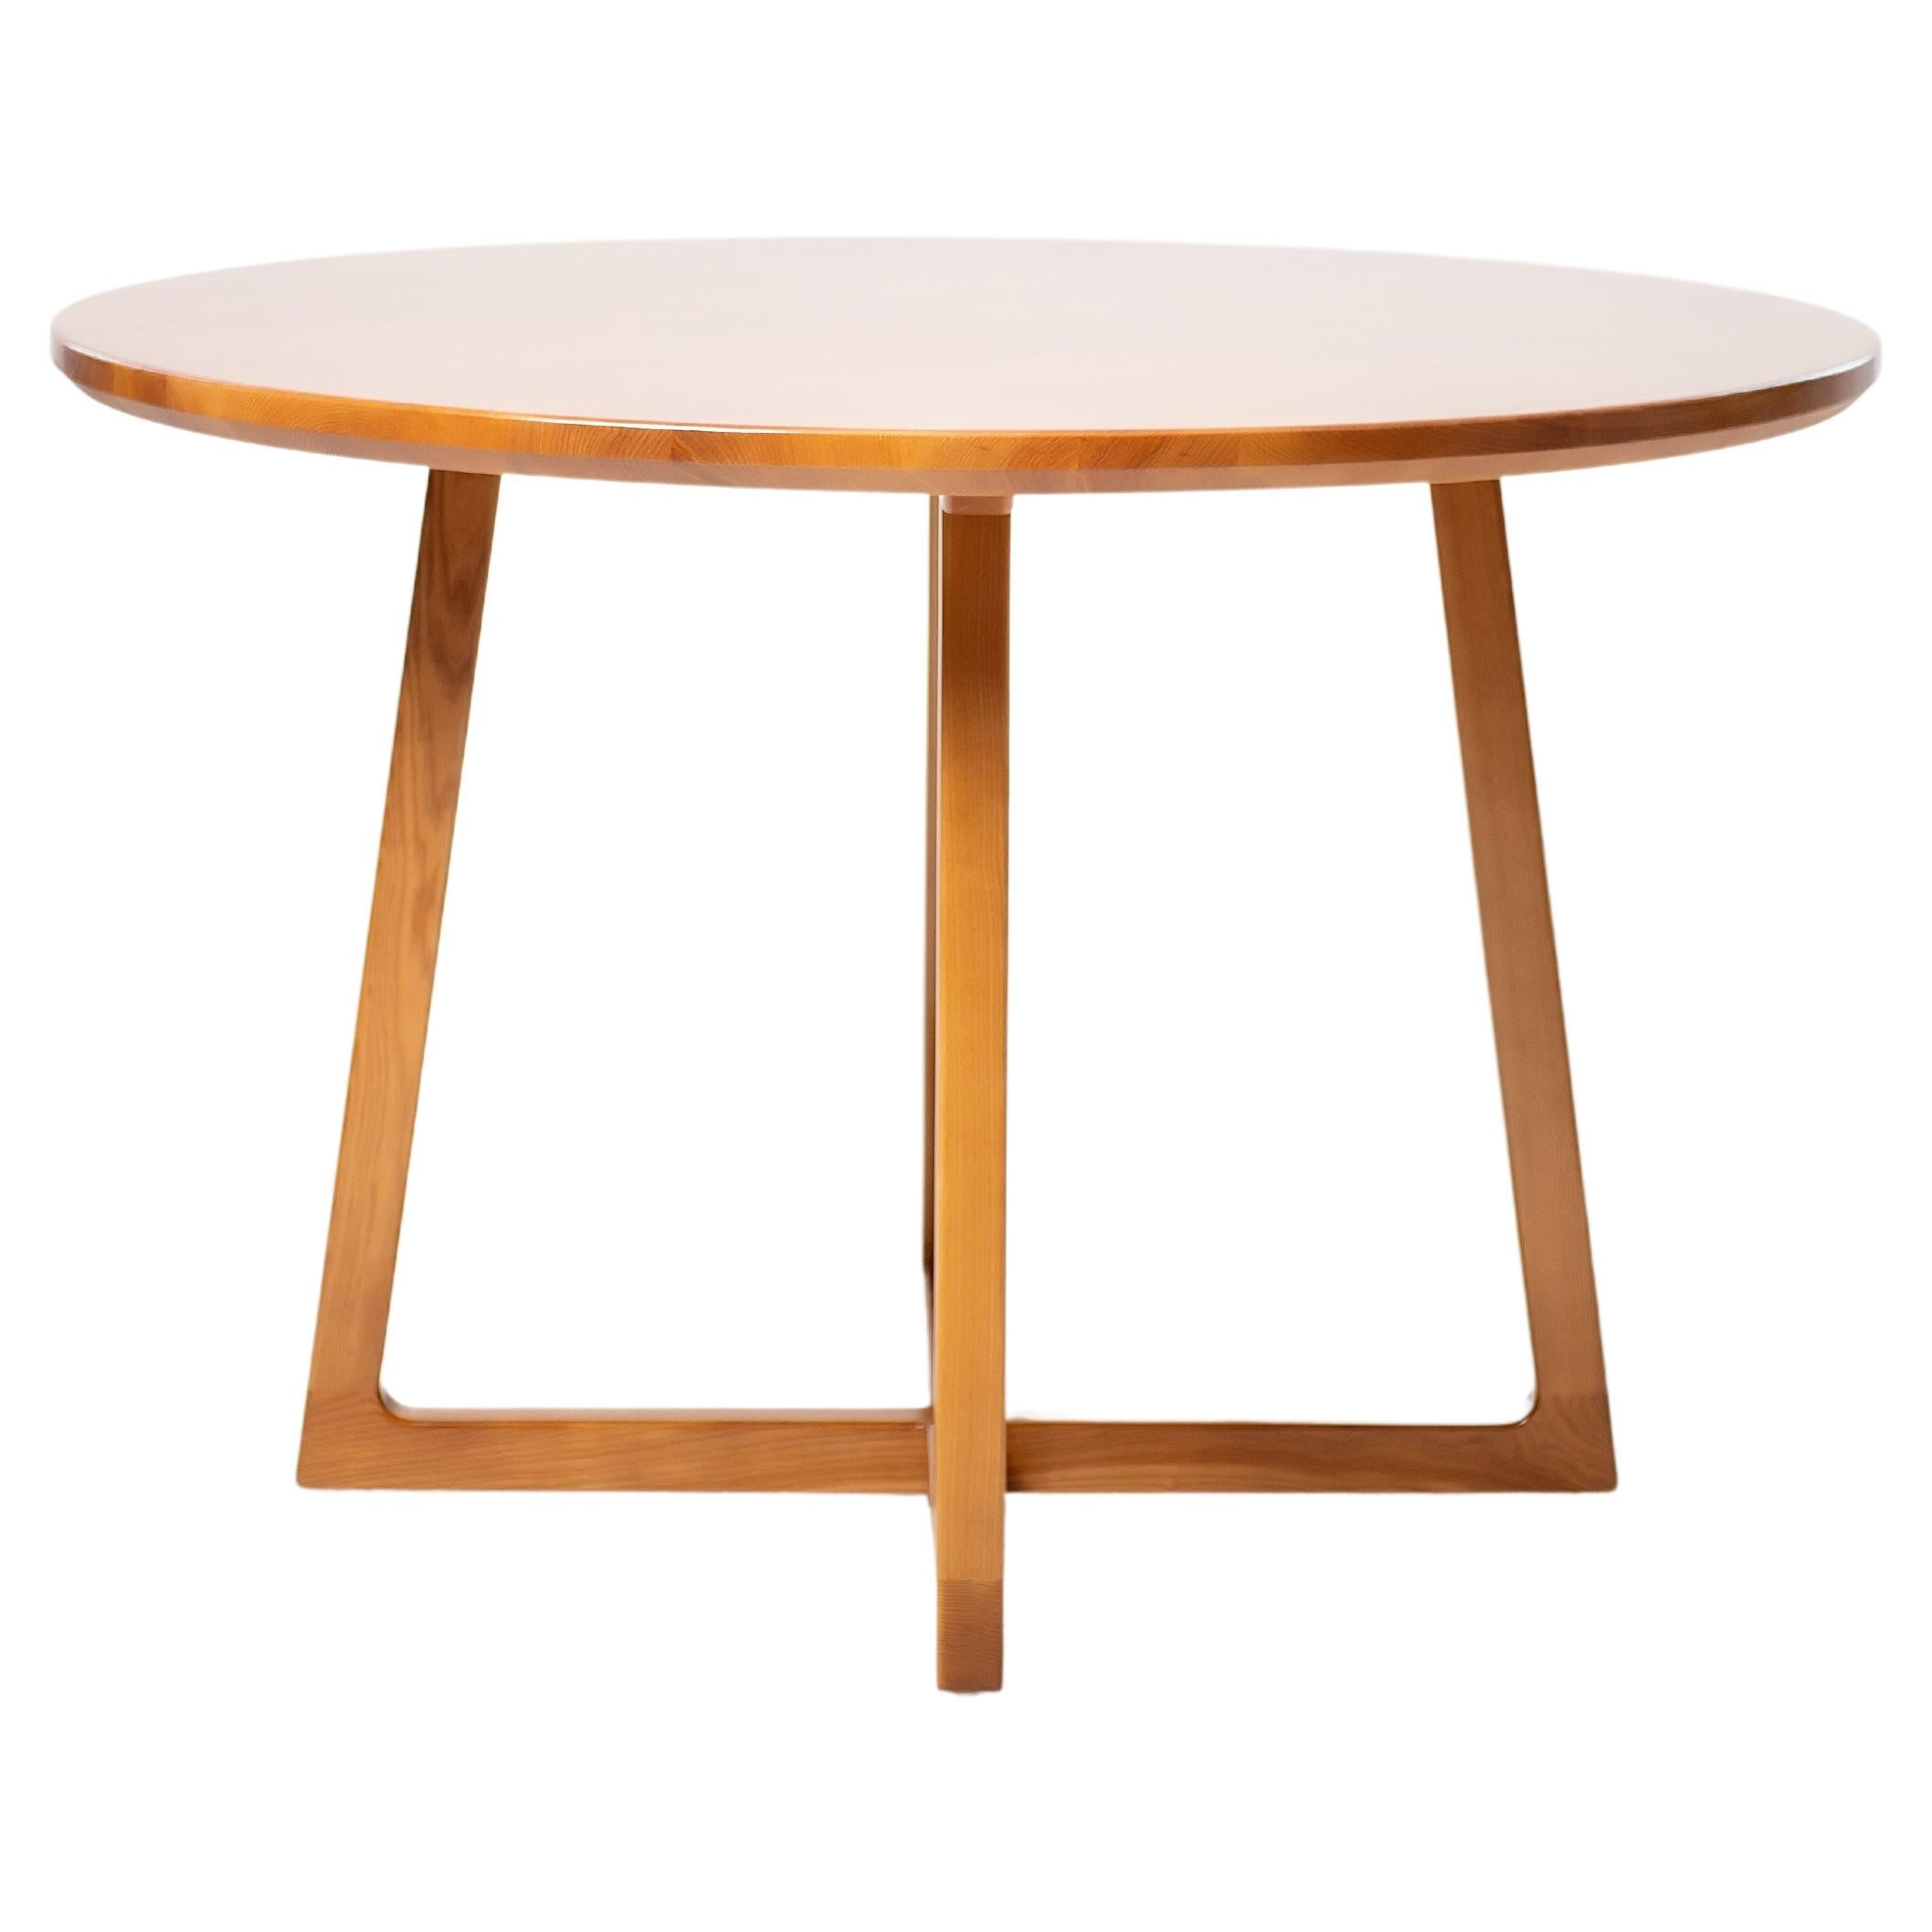 Light Brown Ash Solid Wood Round Dining Table